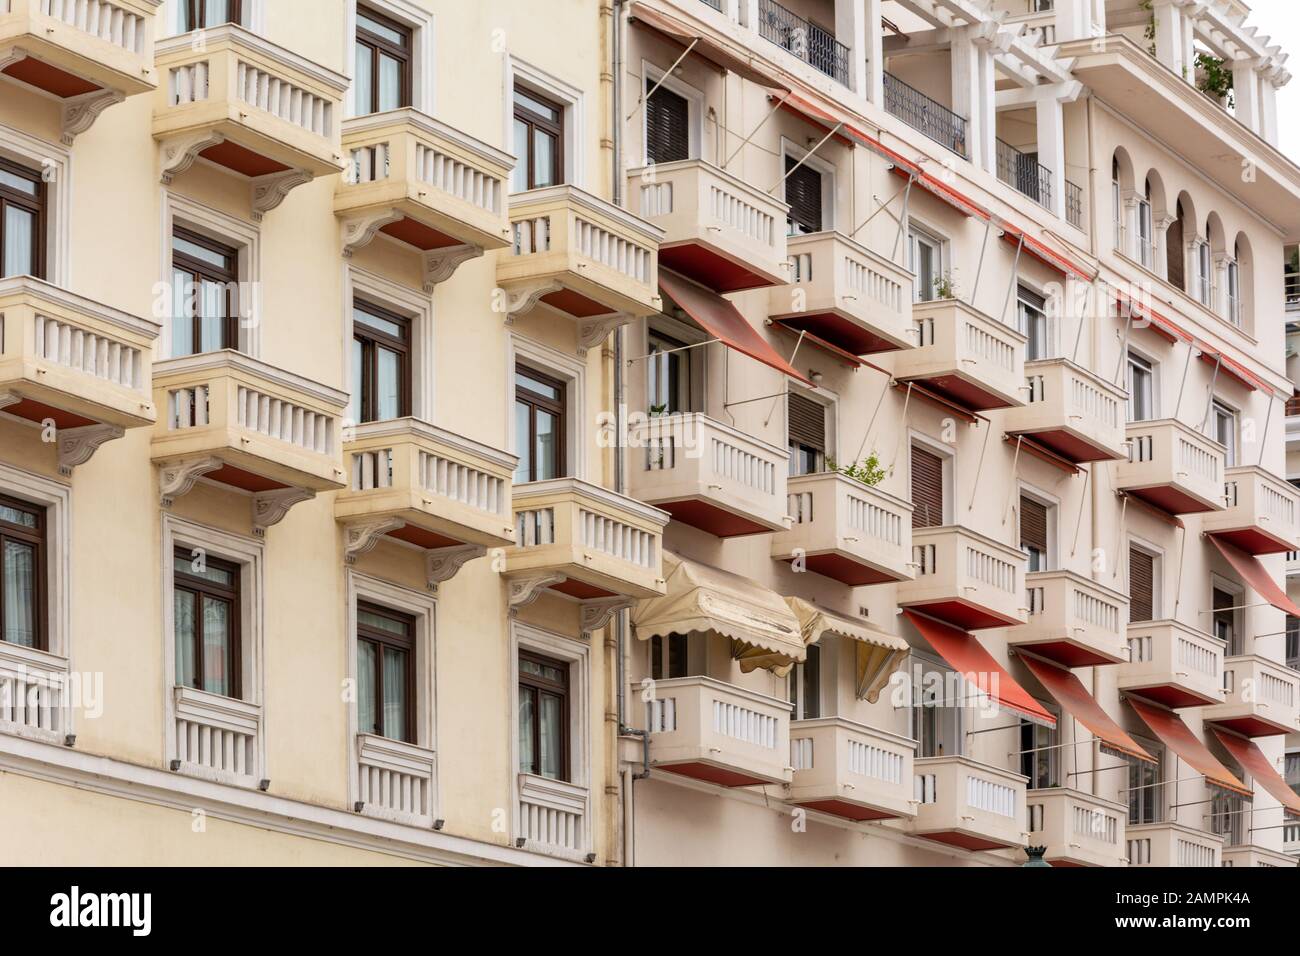 Balconies in the center of Aristotelous Square, Thessaloniki, Greece Stock Photo